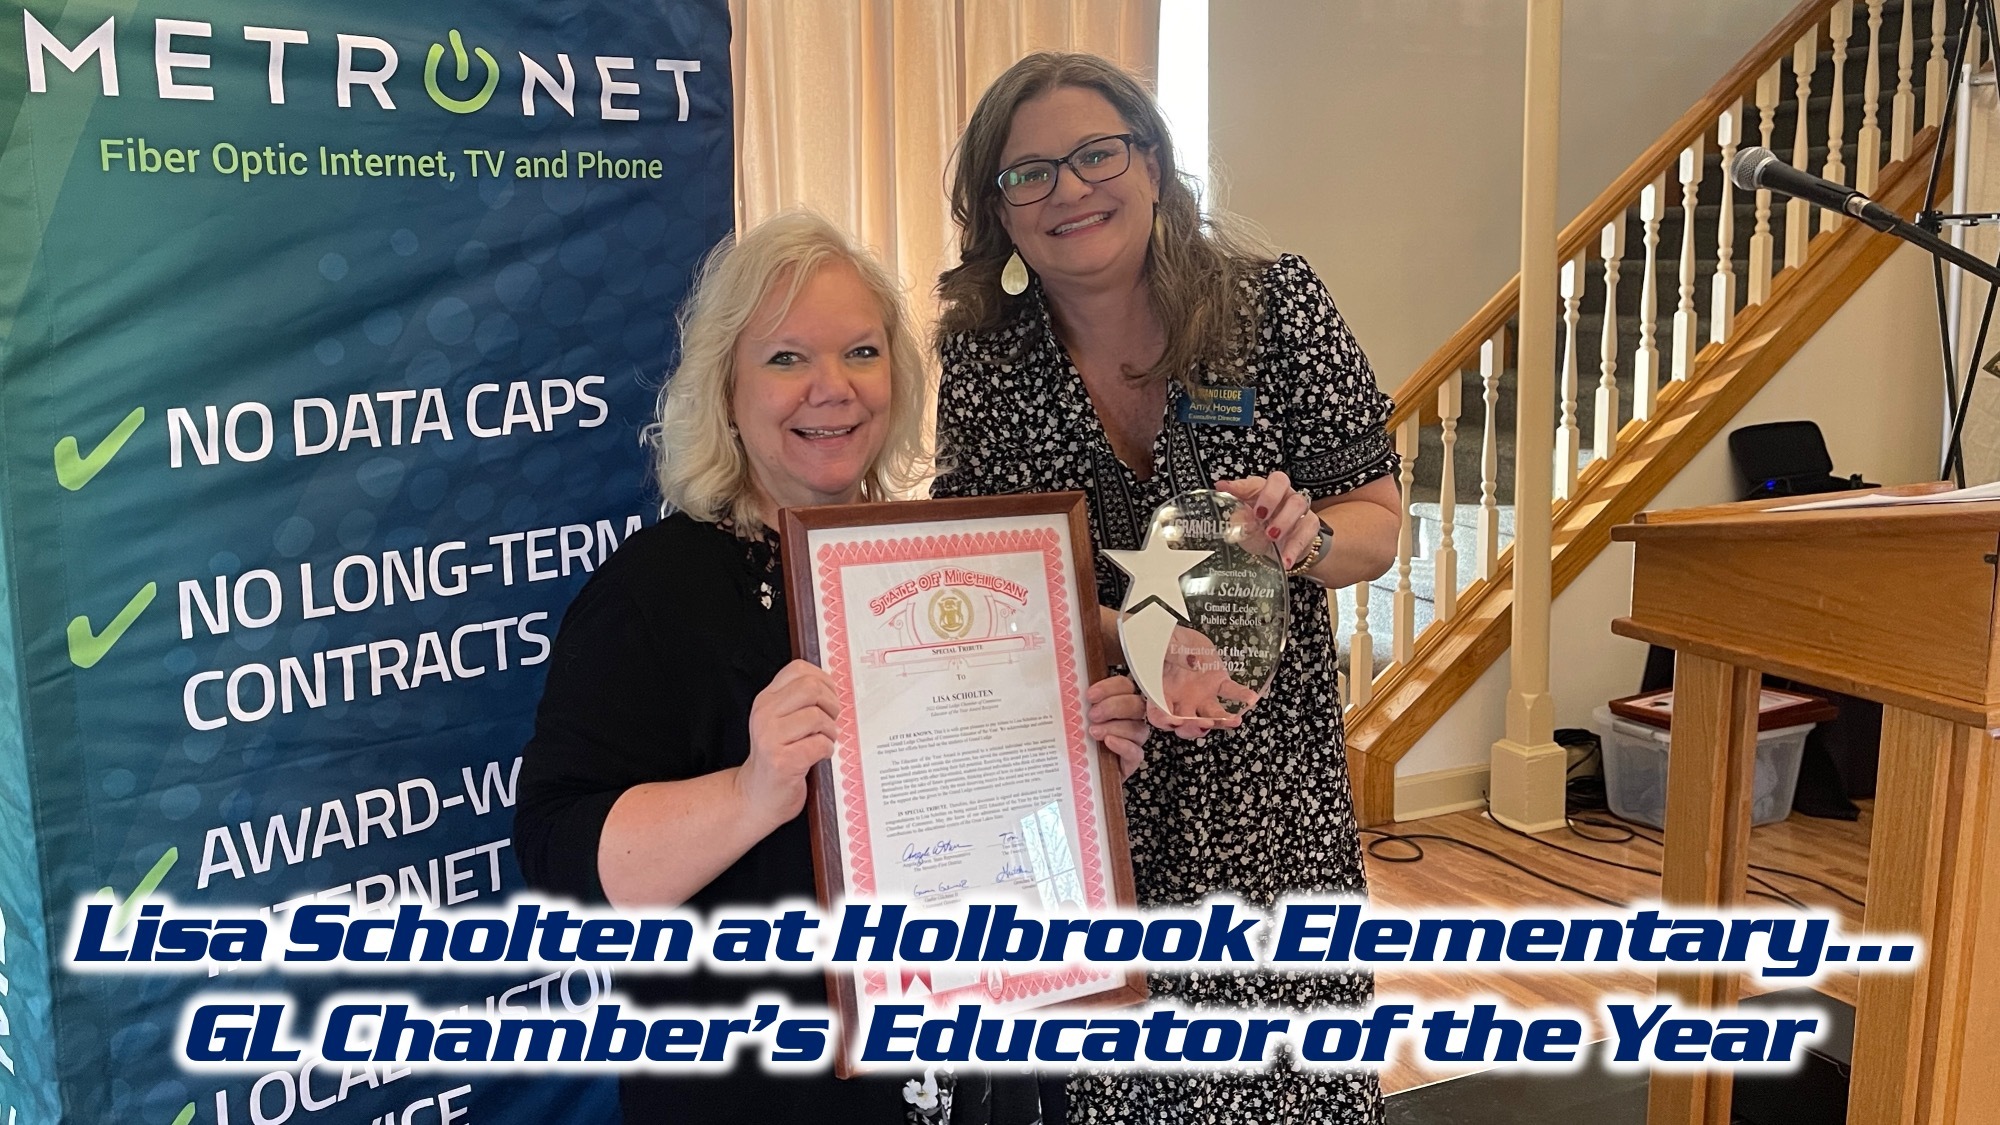 Lisa Scholten, Holbrook Elementary teacher, is the 2022 Educator of the Year!